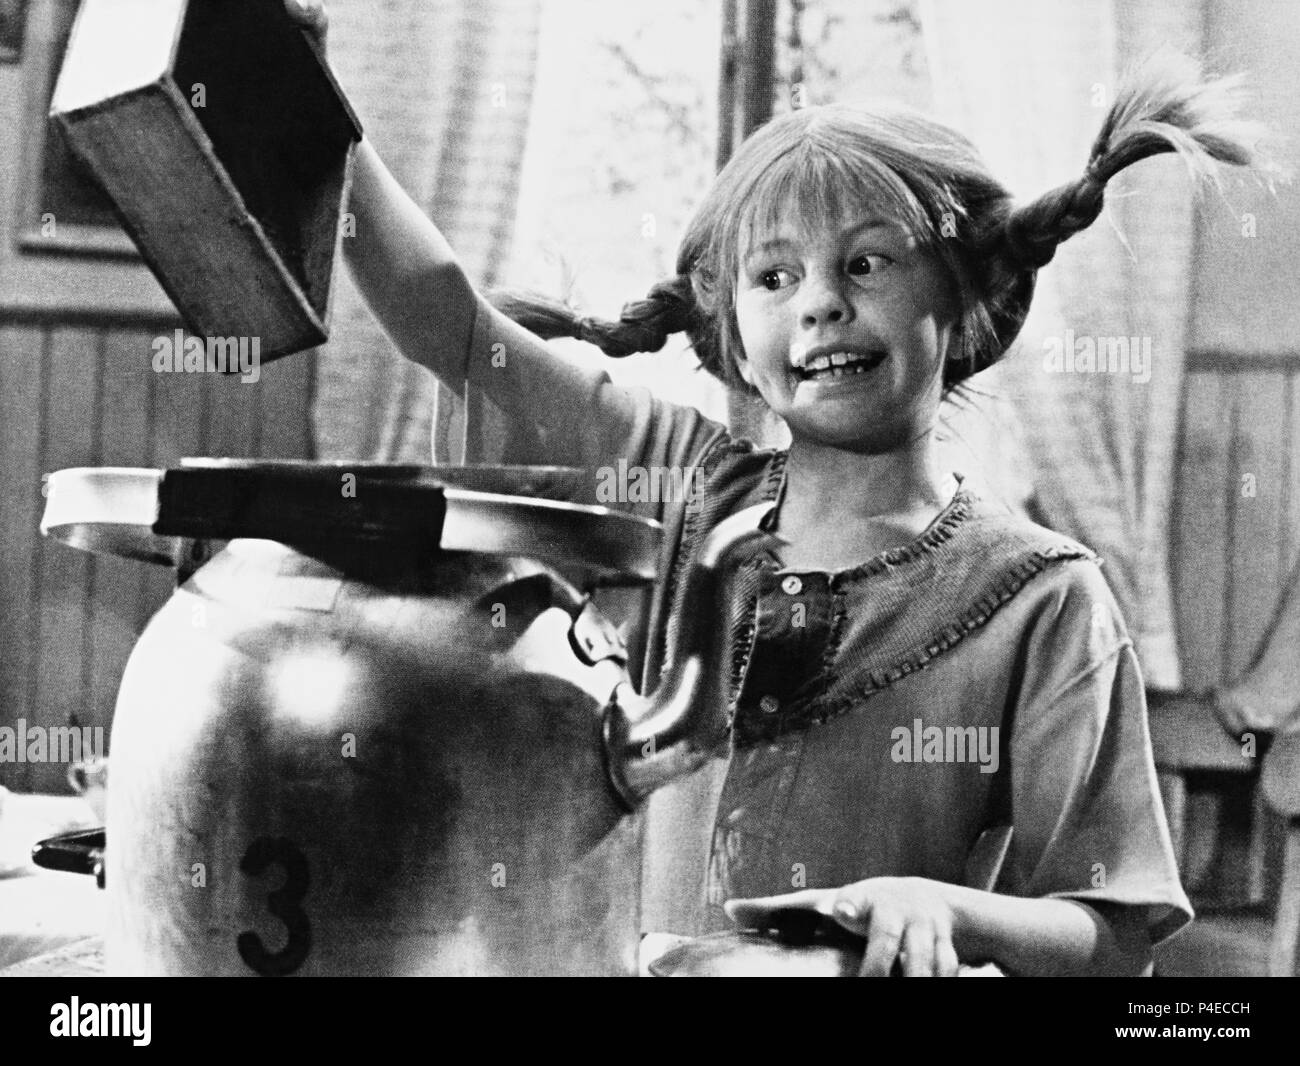 Pippi Black and White Stock Photos & Images - Alamy